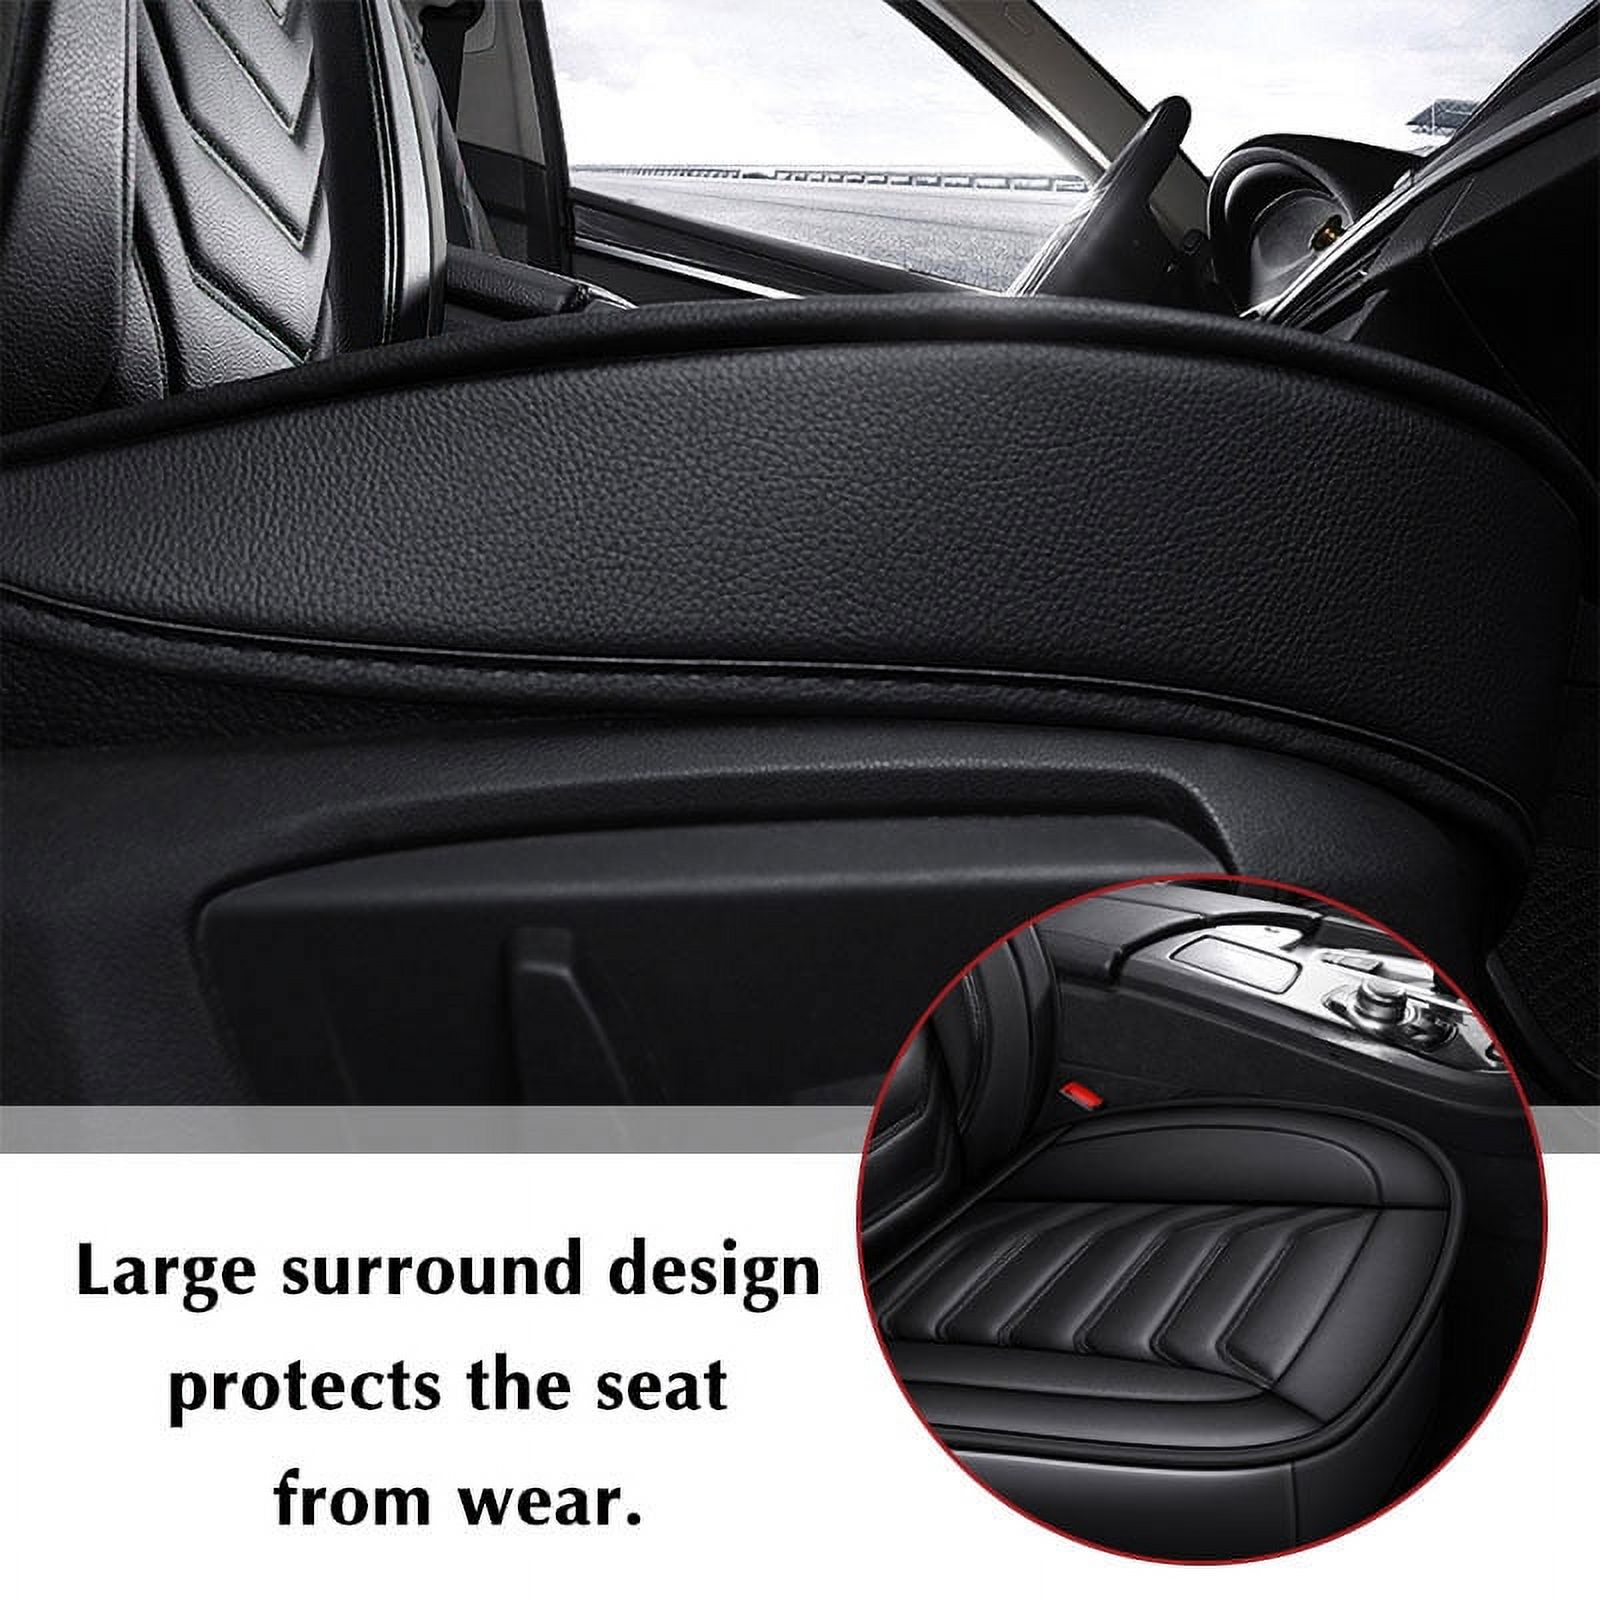 Novashion Piece Luxury PU Leather Front Car Seat Cover with  Backrest,Polyester micro-fiber fabric, Breathable and Soft Auto Seat  Protector,Universal Fit 95% of Cars (Sedan SUV Pickup Van)